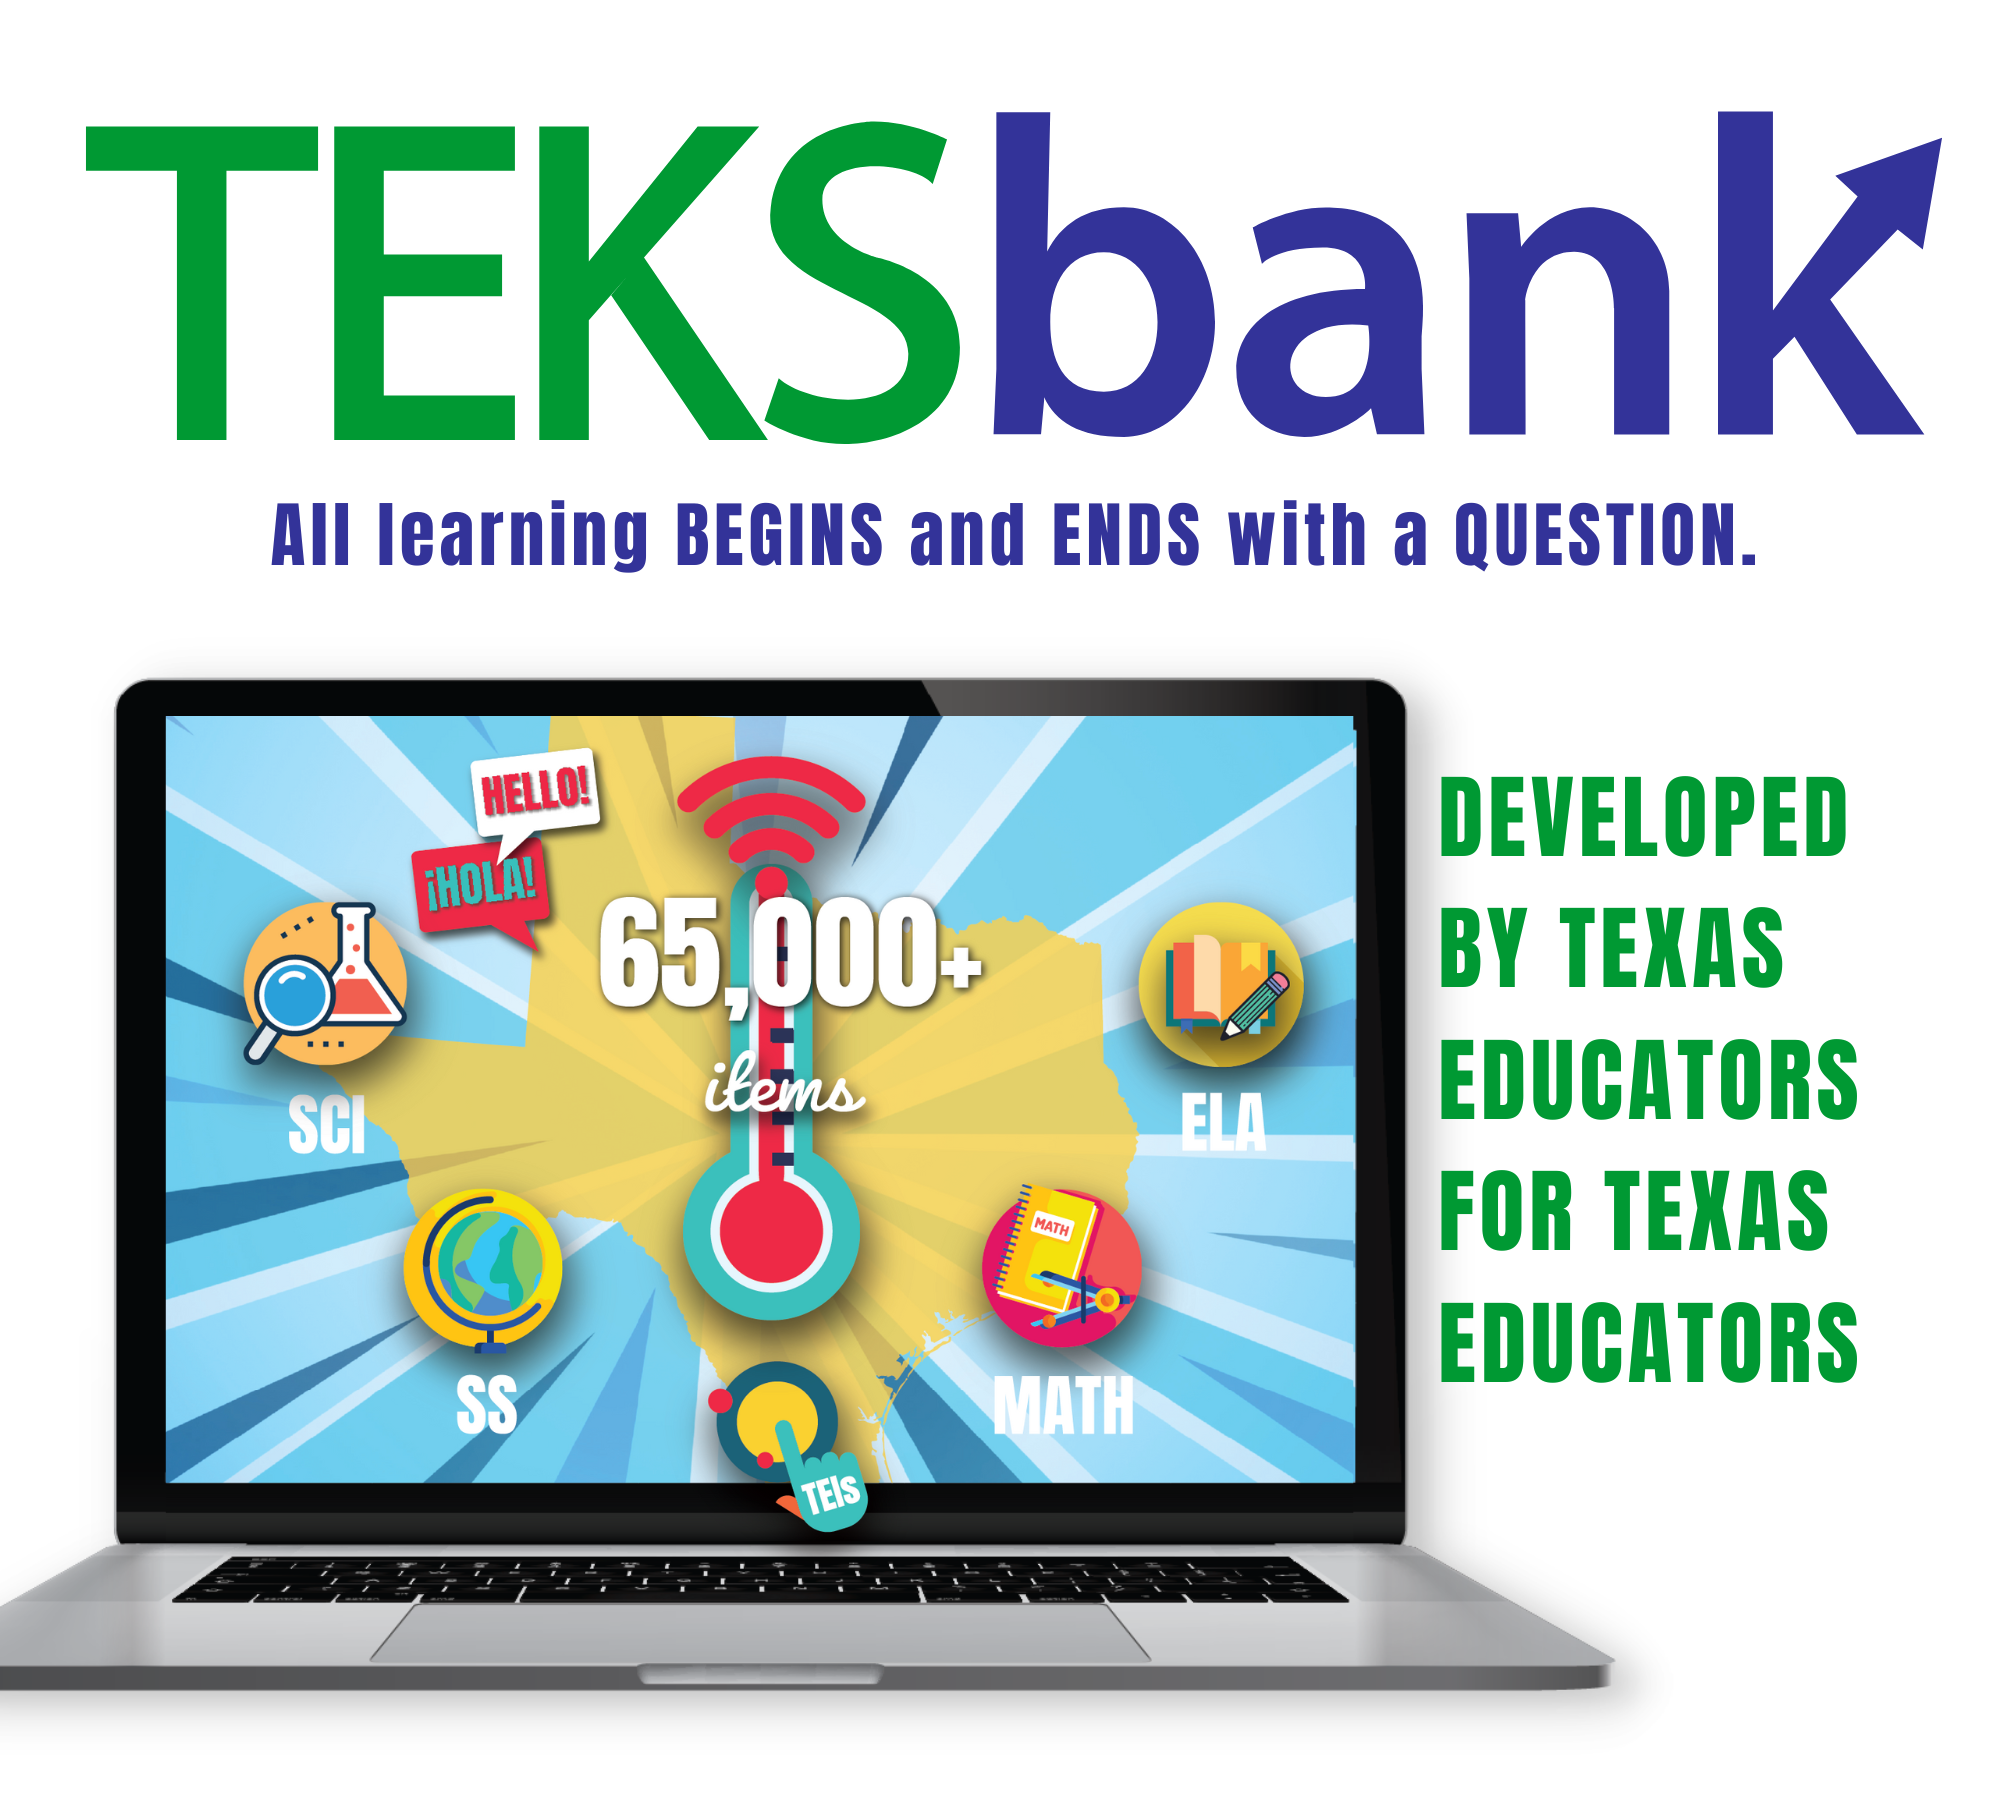 TEKSbank - All learning begins and ends with a question. Developed by Texas educators for Texas educators. Laptop with various icons on its screen for different school subjects. 65,000+ items.